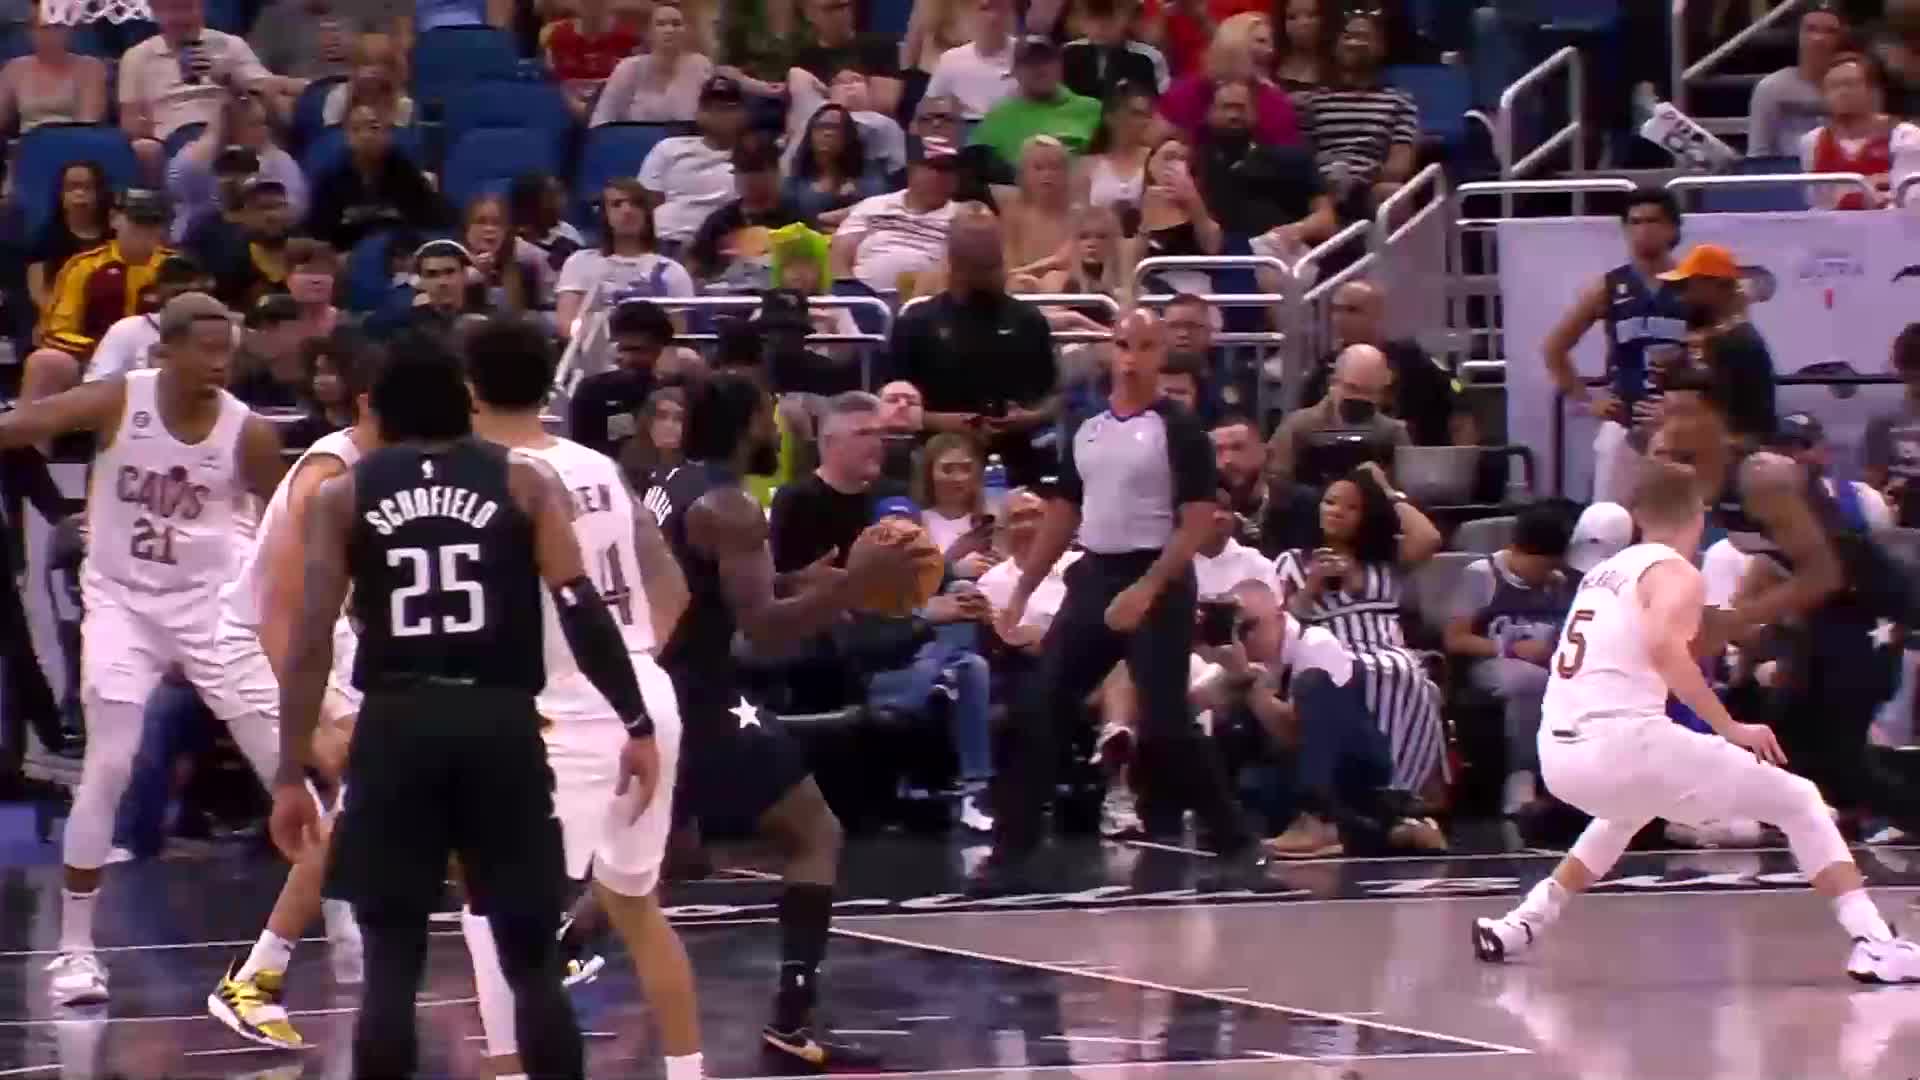 Jay Scrubb with a dunk vs the Cleveland Cavaliers